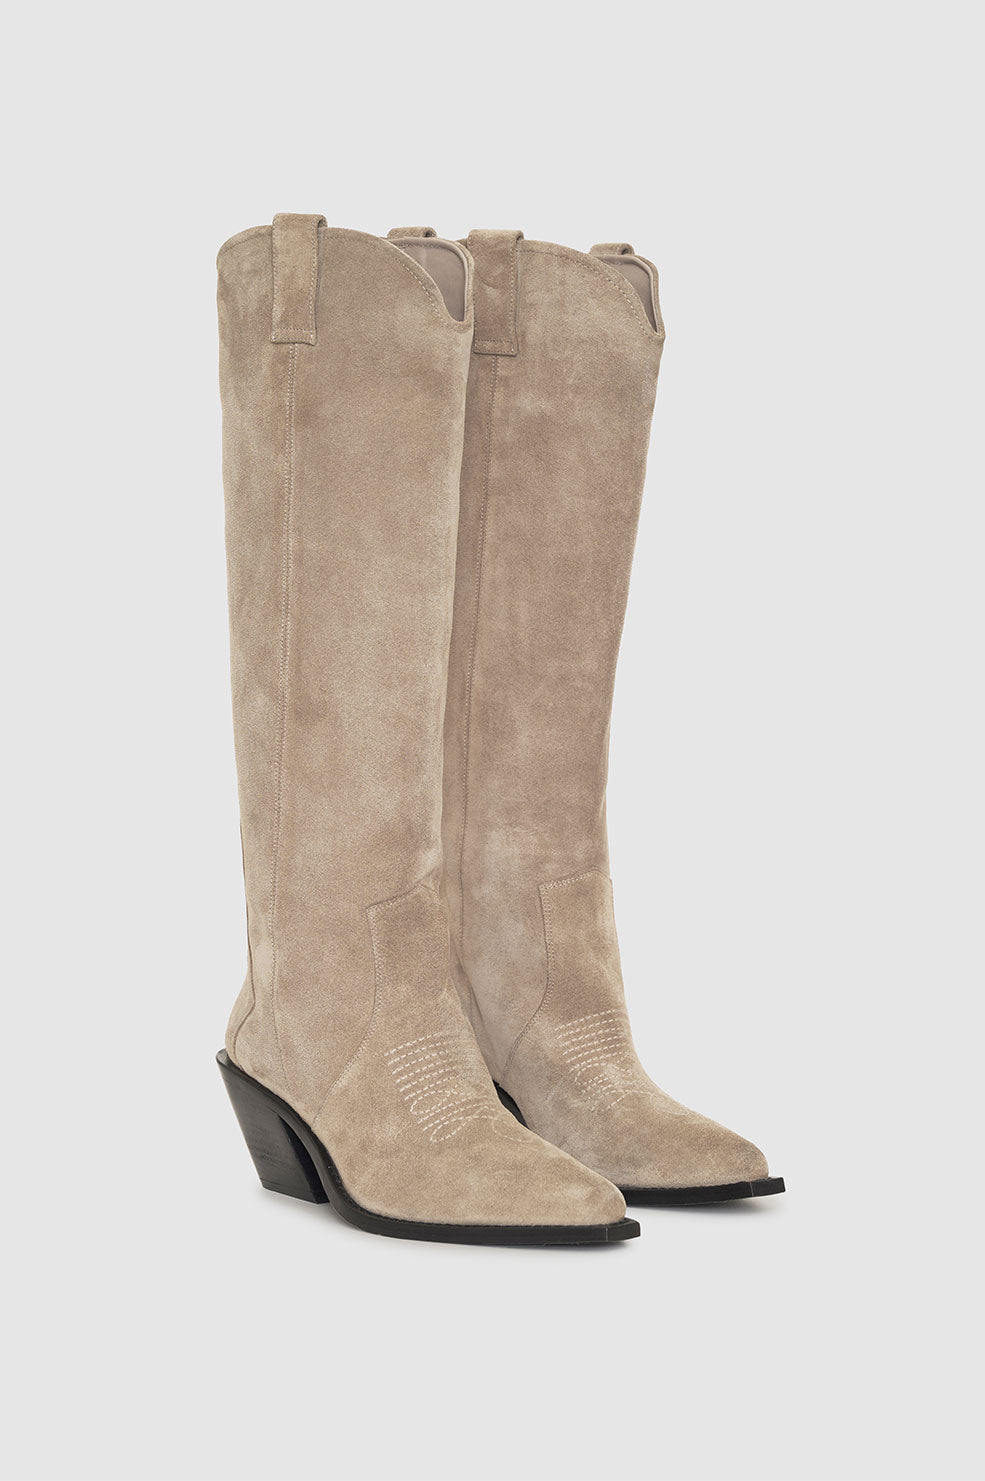 Anine Bing | Tall Tania Boots - Ash Grey Suede